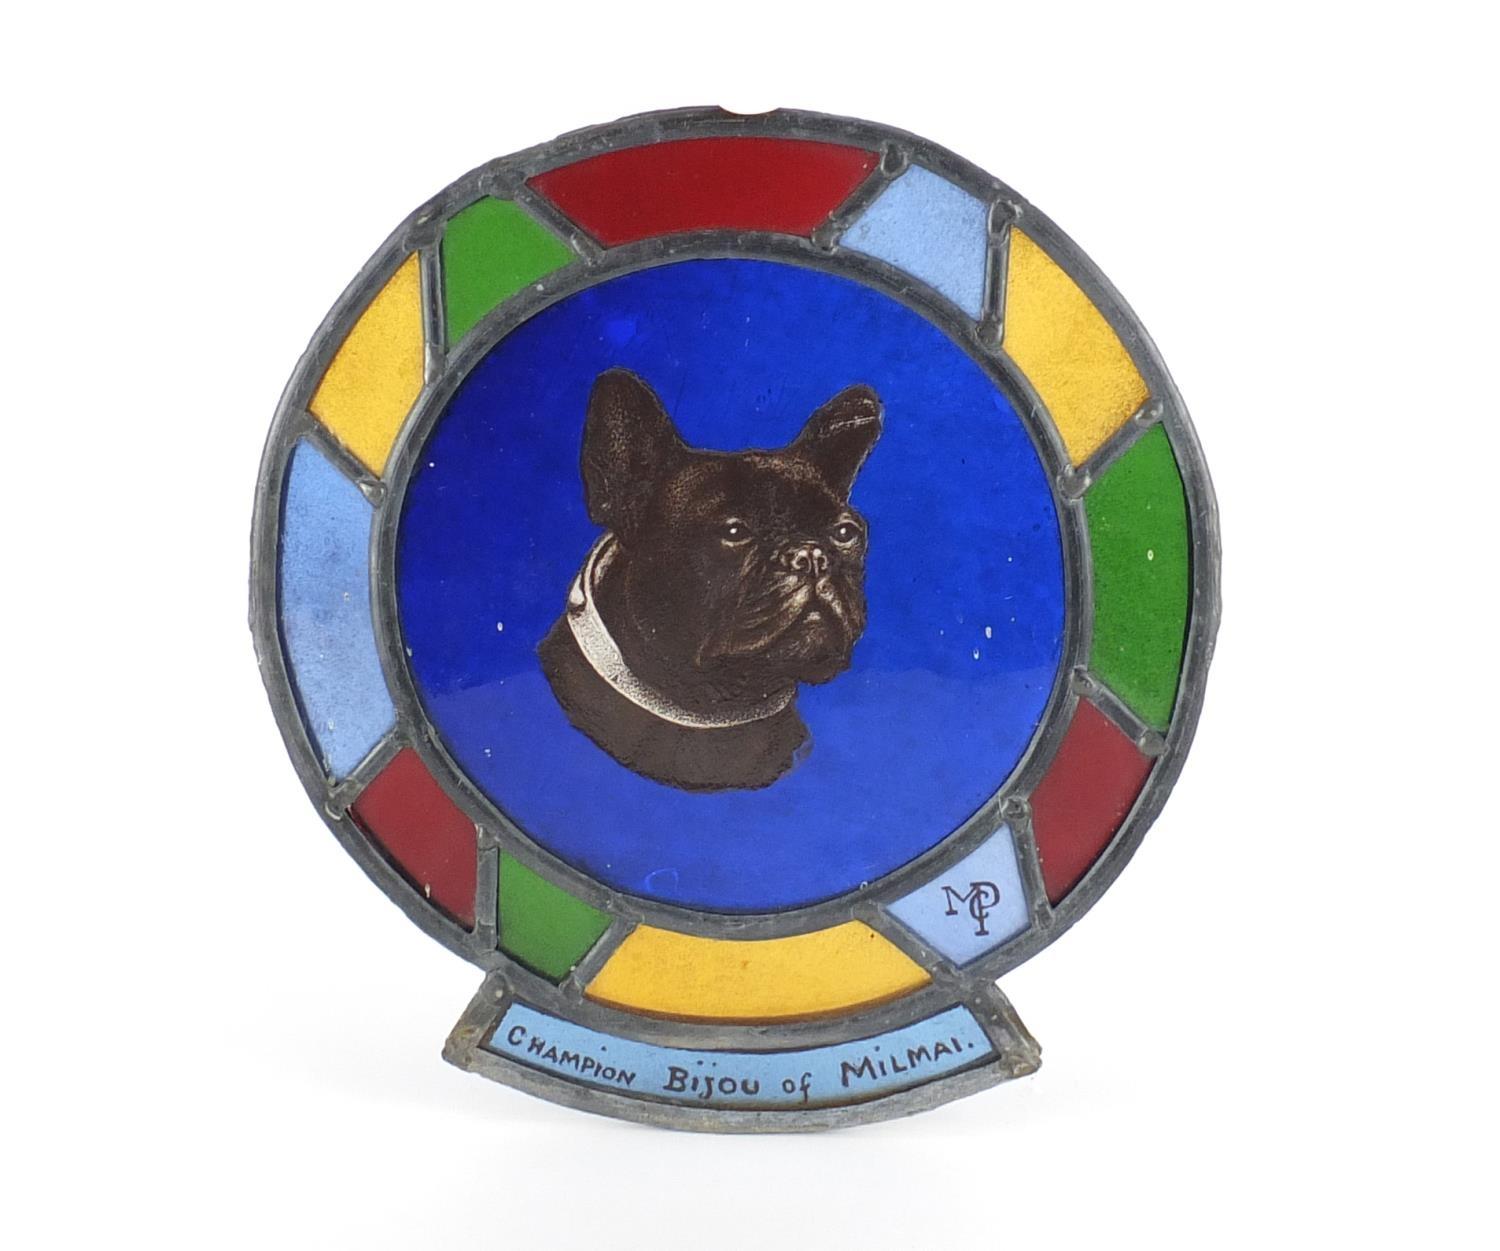 Early 20th century Leaded stain glass panel hand painted with a bulldog, inscribed Champion Bijou Of